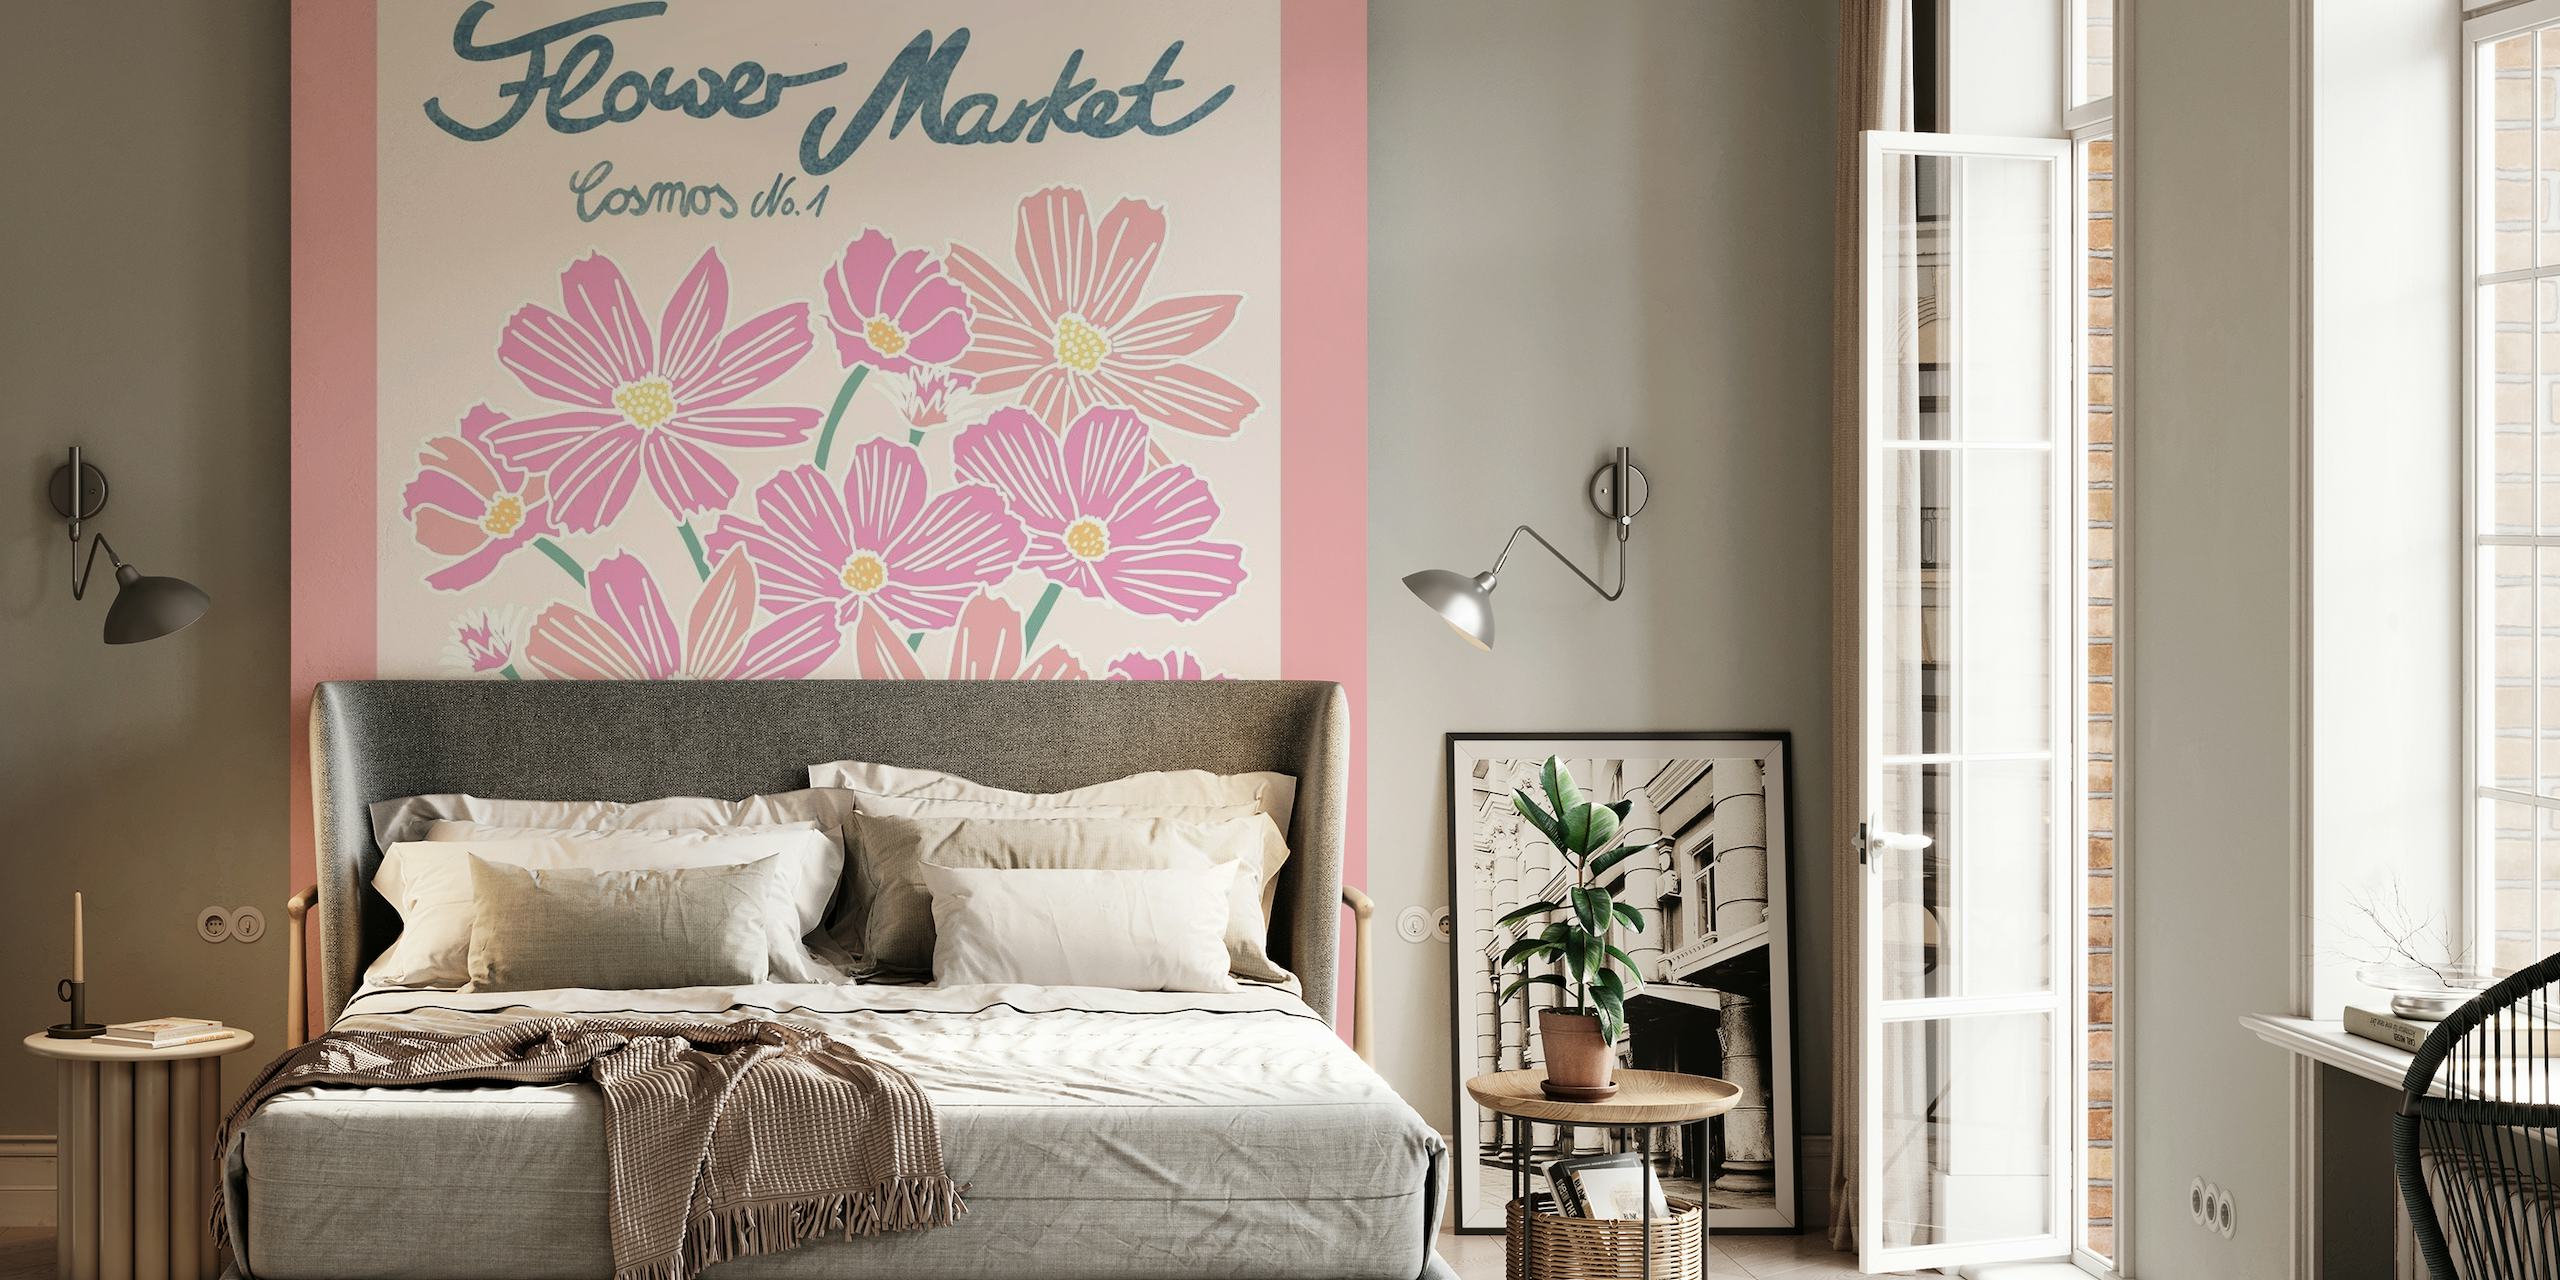 Illustration of pink cosmos flowers wall mural on a pastel background titled Flower Market Cosmos 1